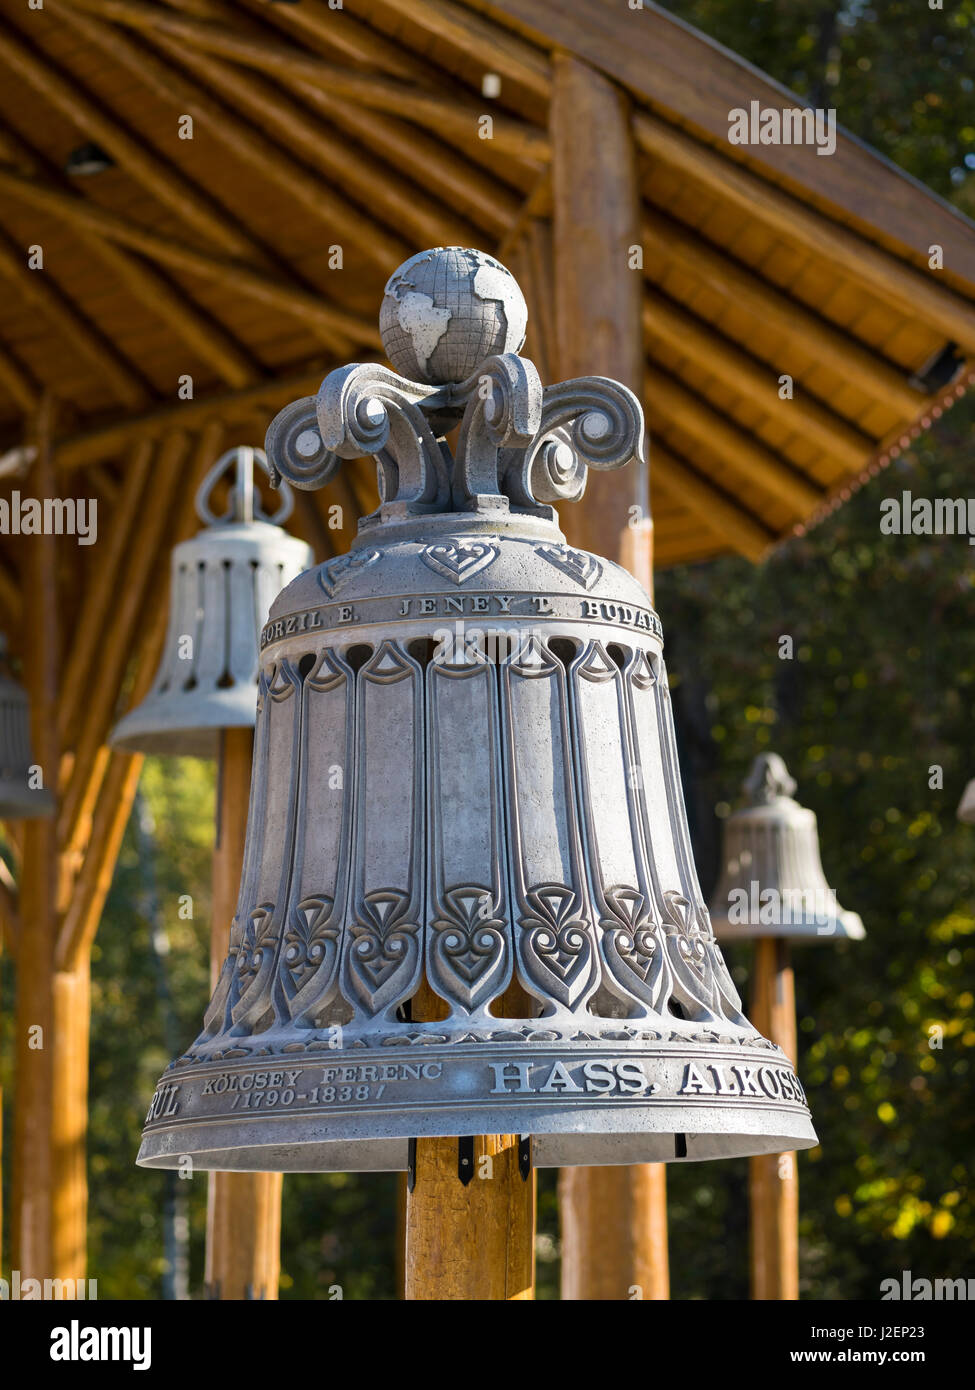 Hajduszoboszlo, the collection of bells, the landmark of the spa town in the Hungarian Puszta. Hungary, November (Large format sizes available) Stock Photo